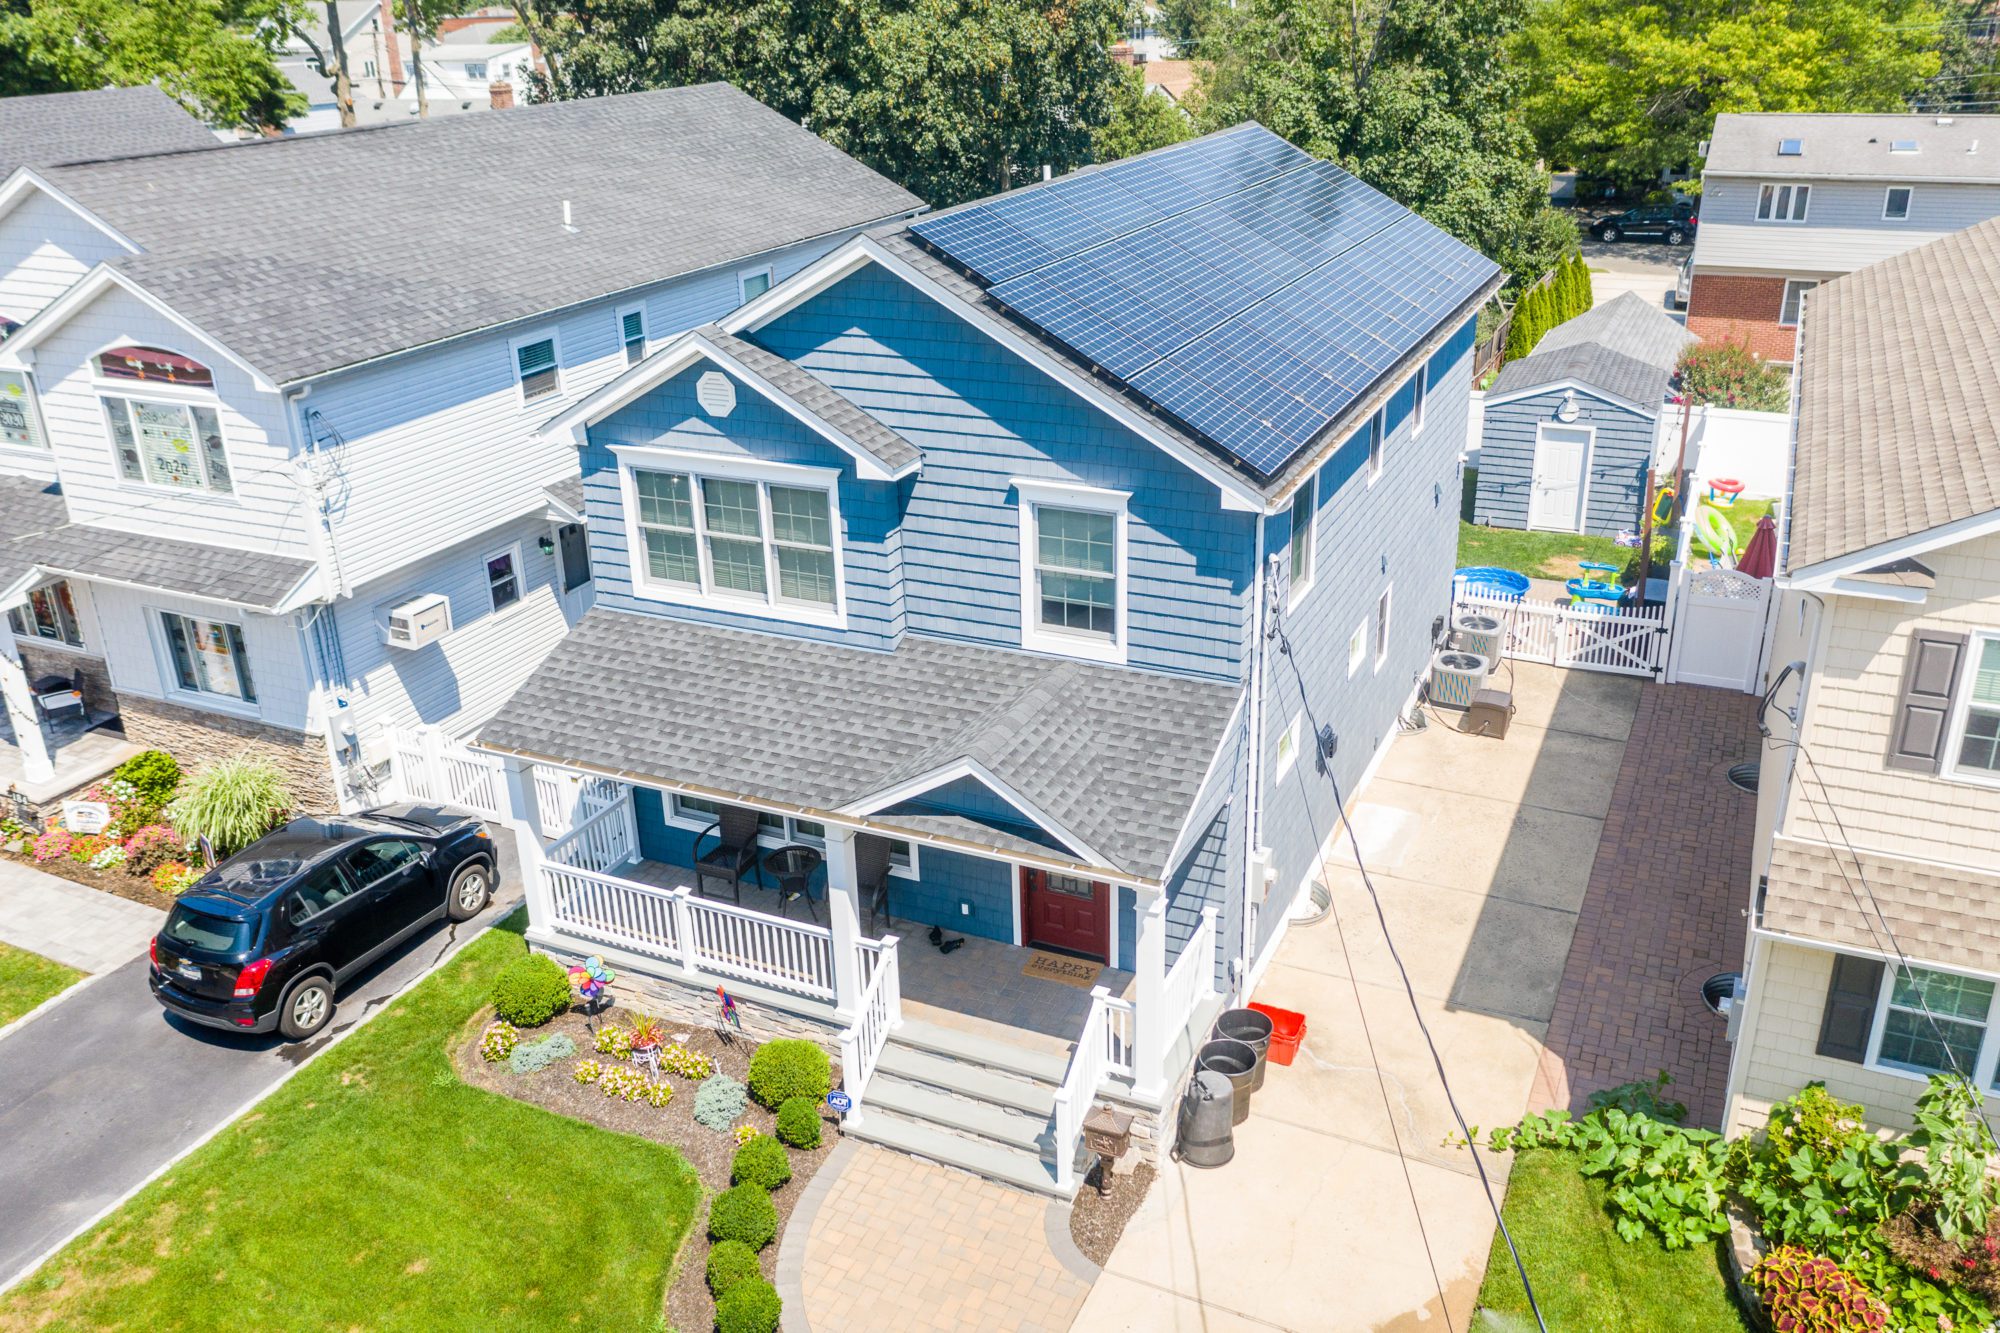 Solar panels attatched to this house on LOng Island enable to homeowners to use solar energy to power their home. The cost of solar is fixed, allowing the homeowners to increase their savings.